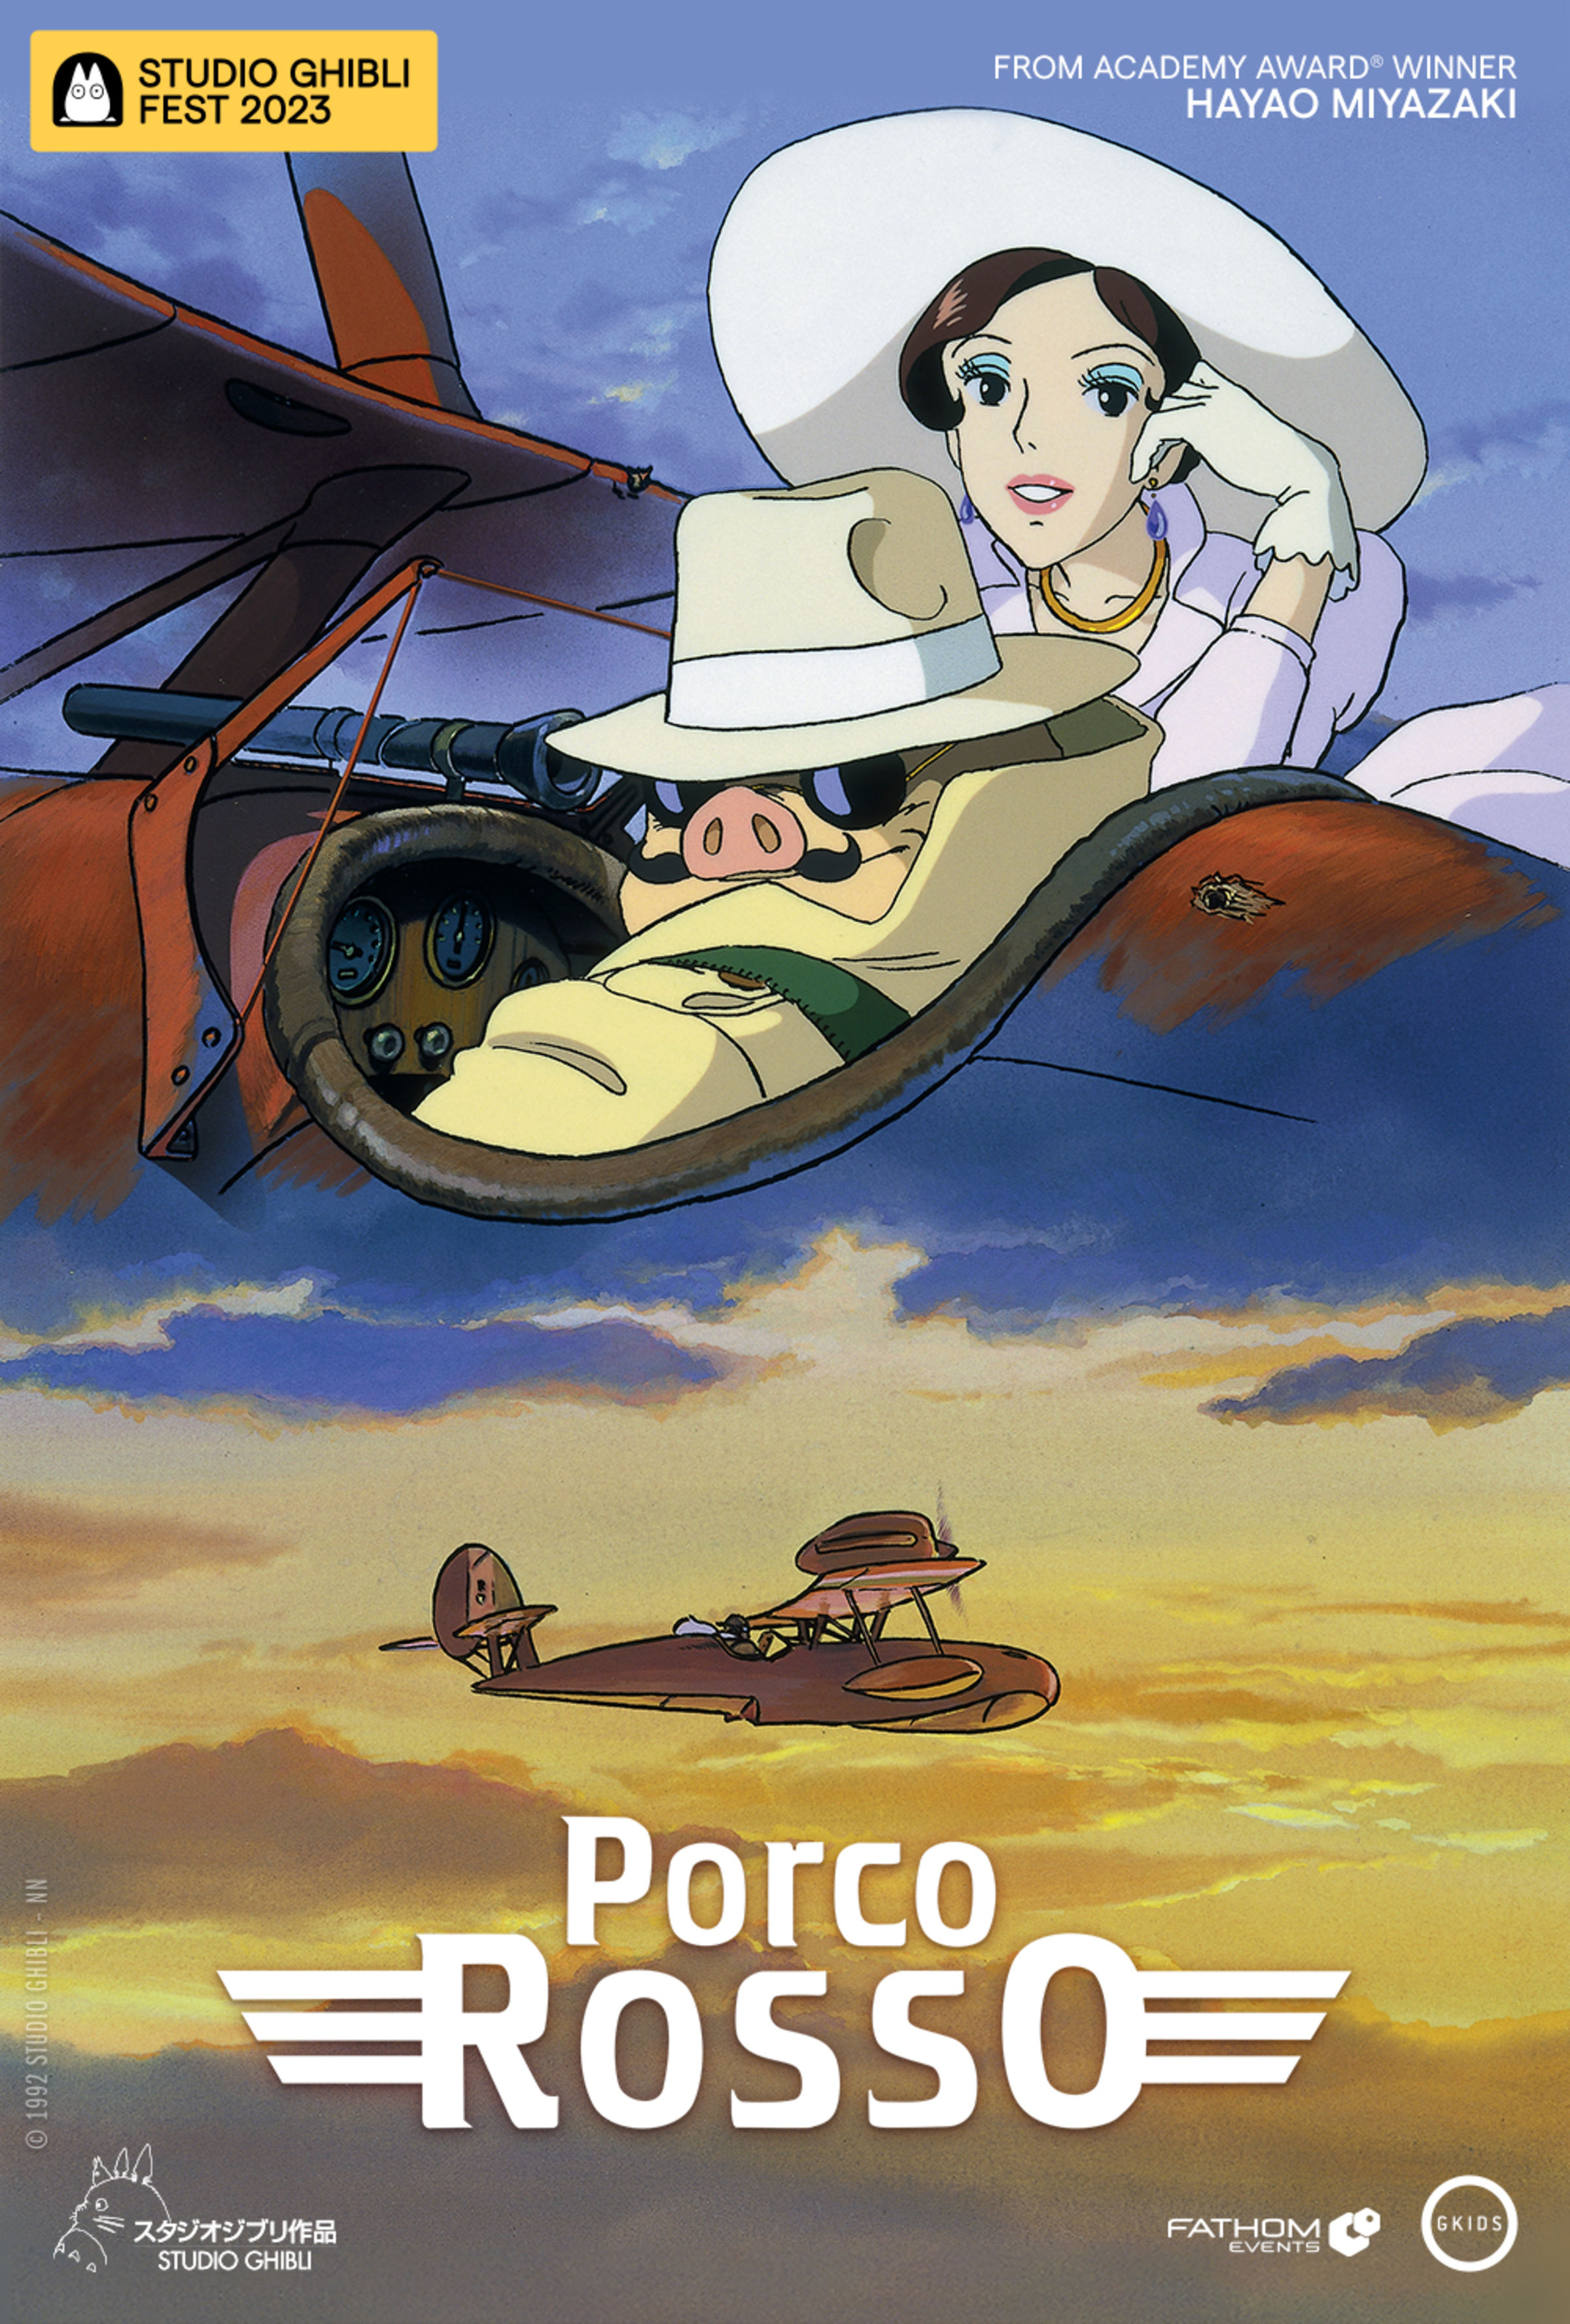 Porco Rosso – The Studio Ghibli Collection